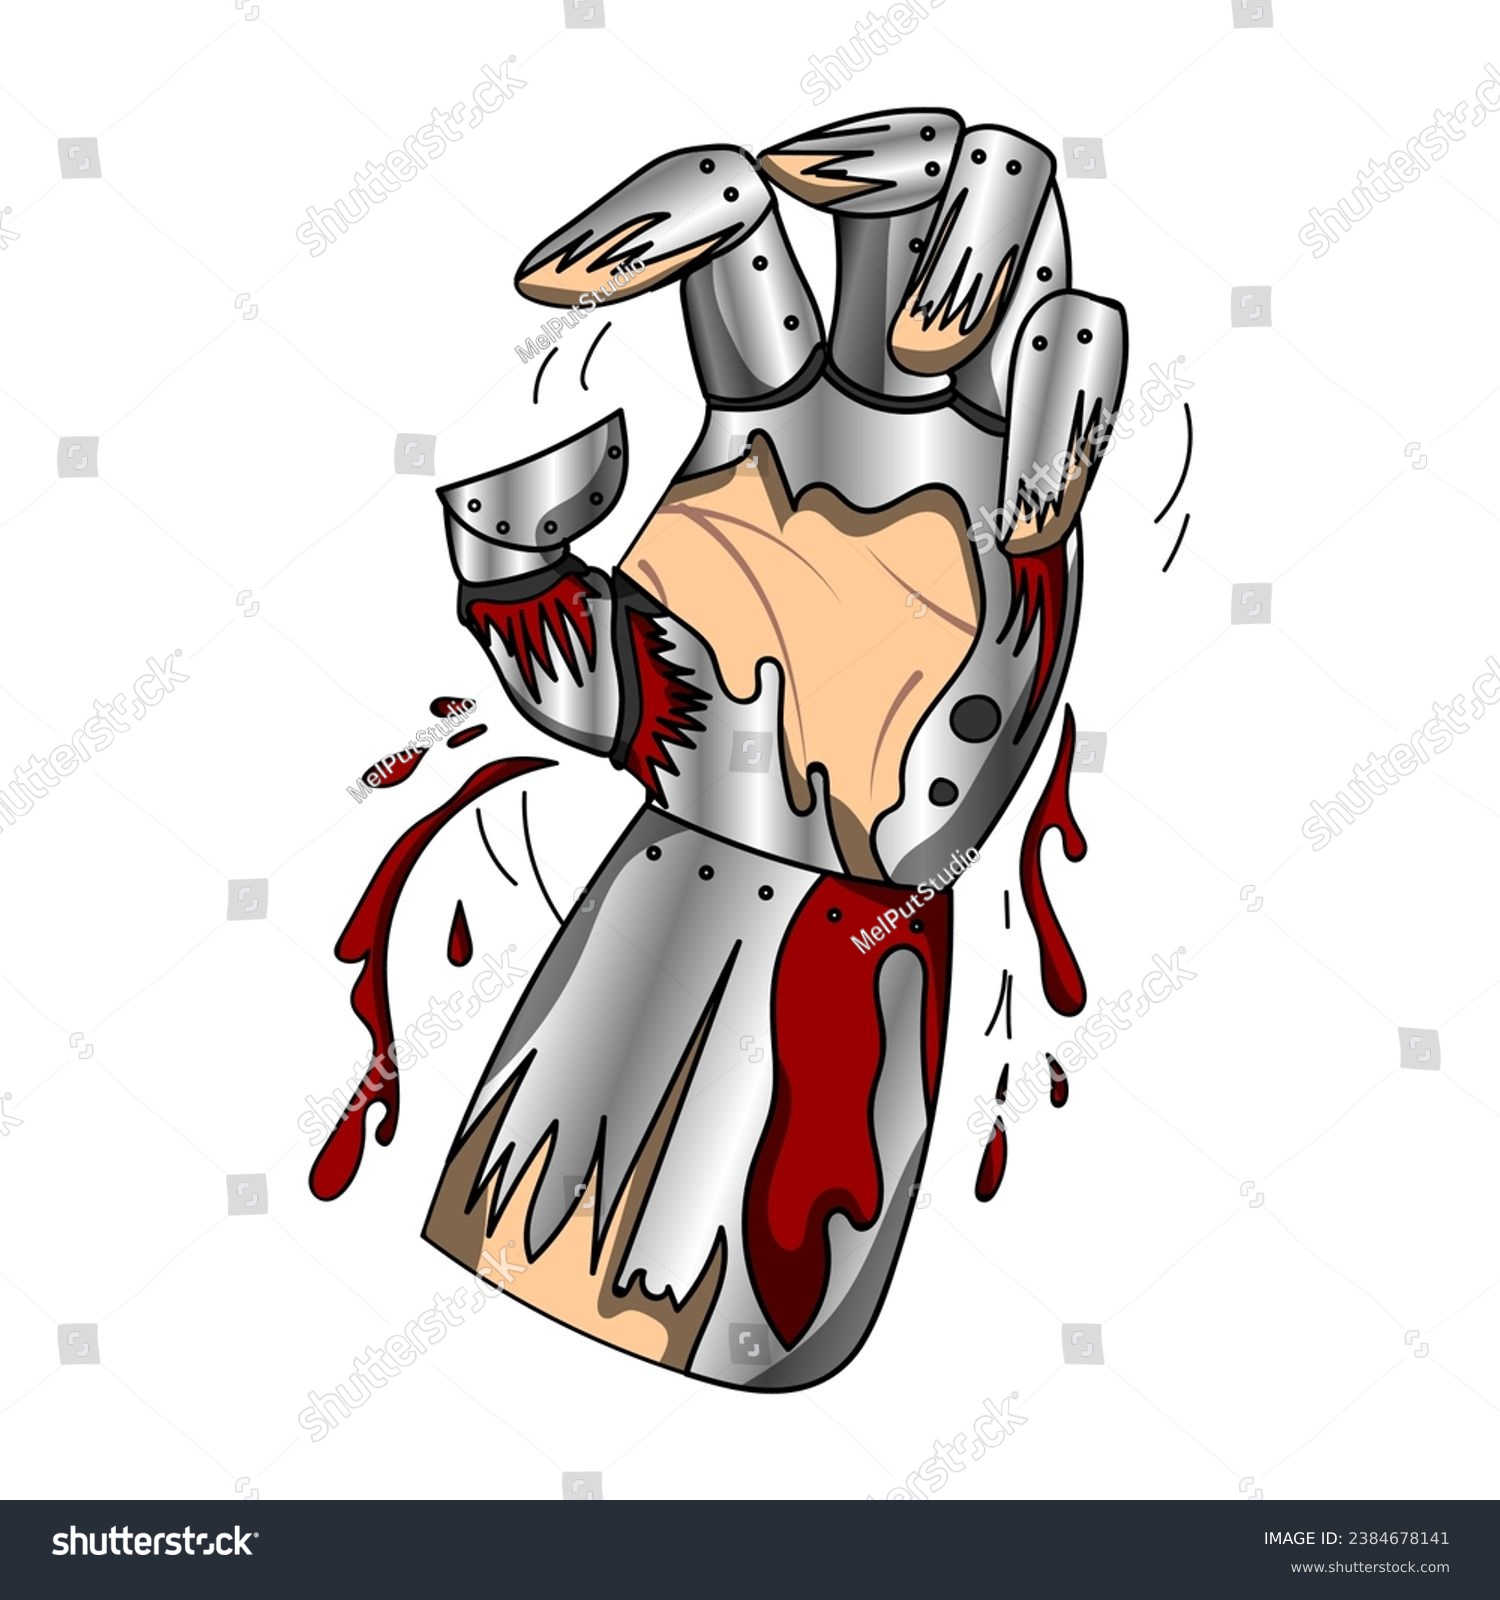 SVG of Illustration of a medieval warrior's iron fist. A warrior's hand with its broken armor. T-shirt design idea svg